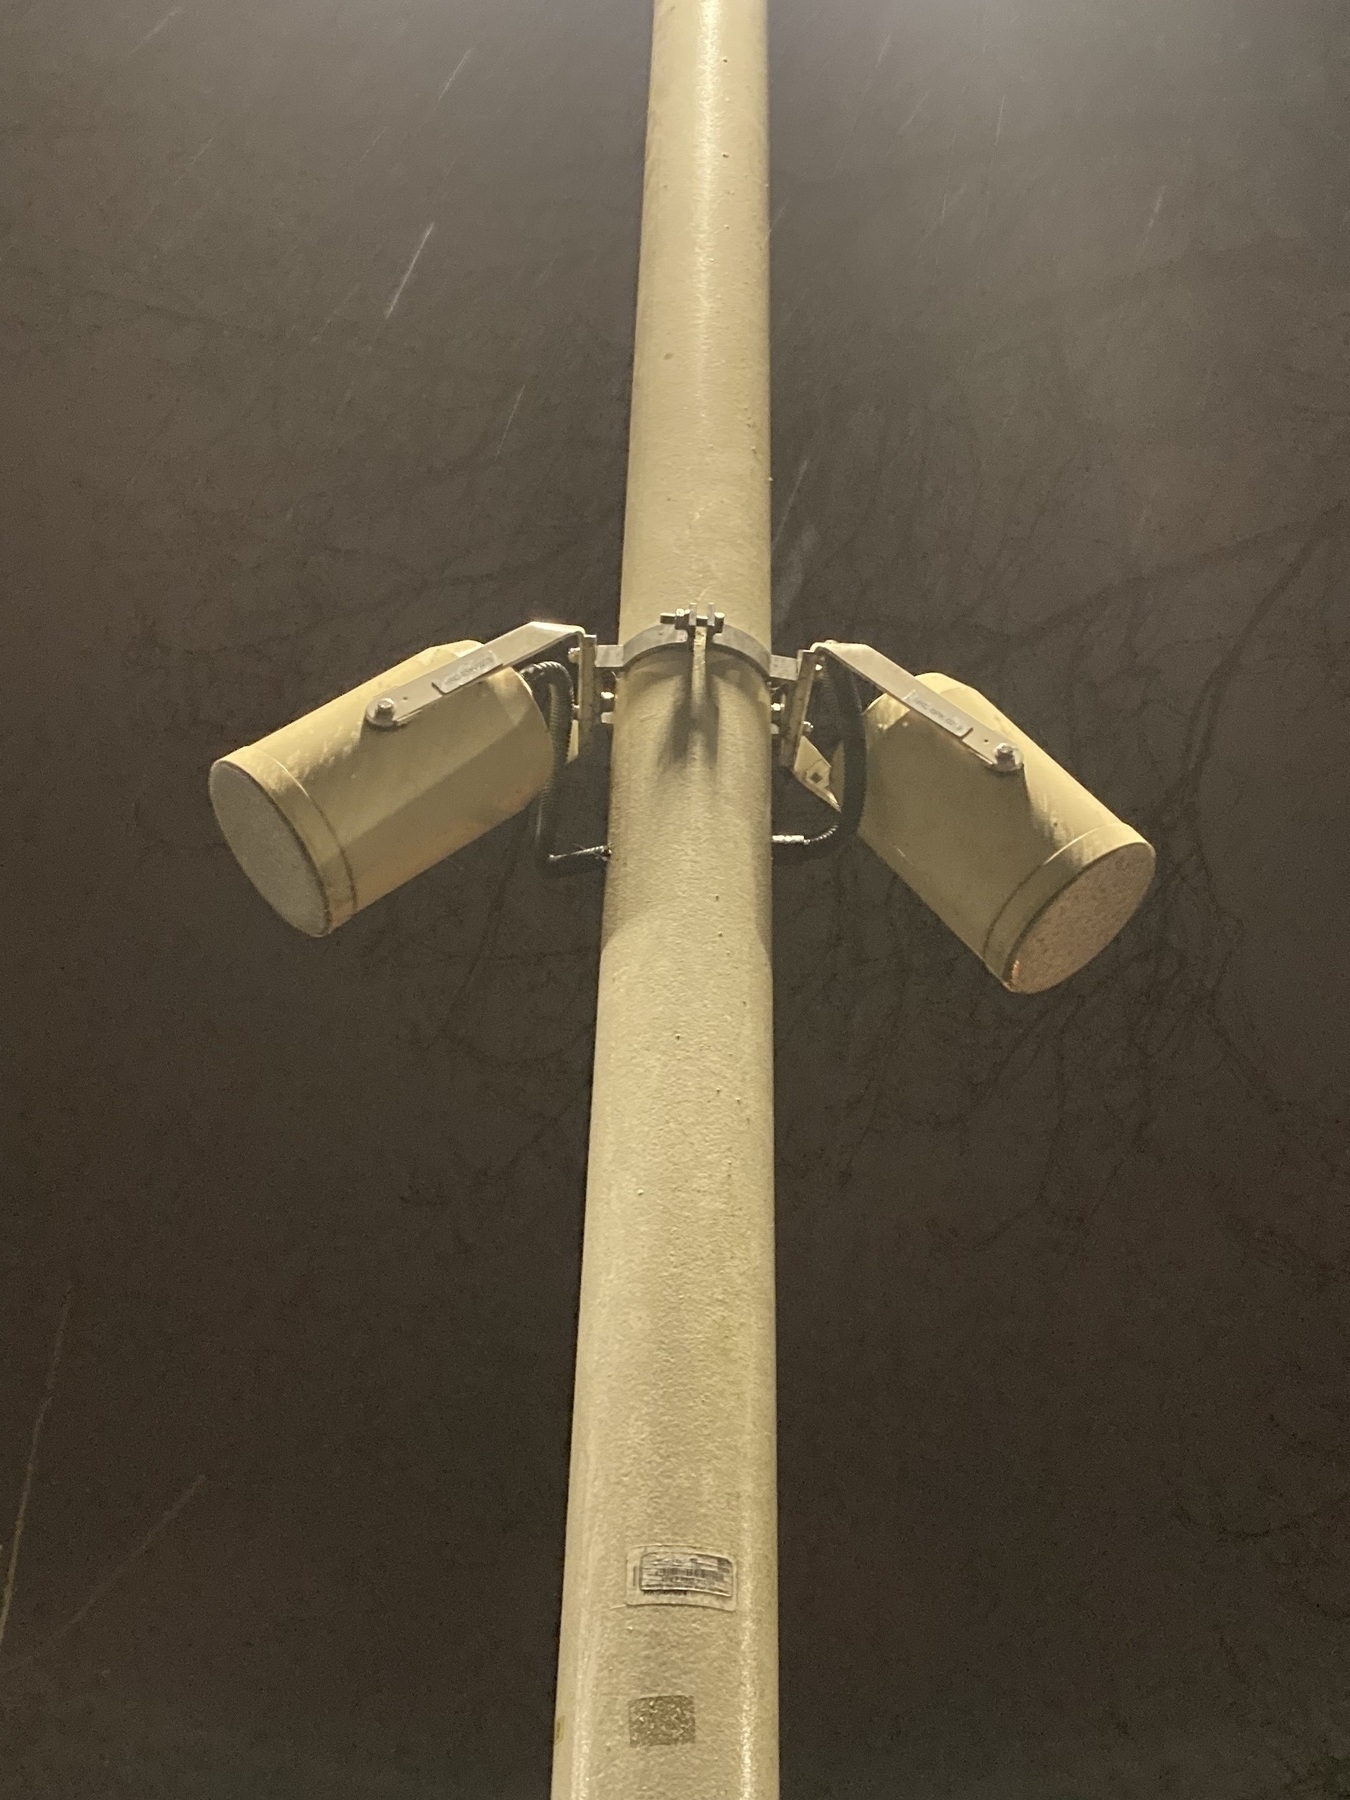 Paired cylindrical public address speakers on a lampost in the rain